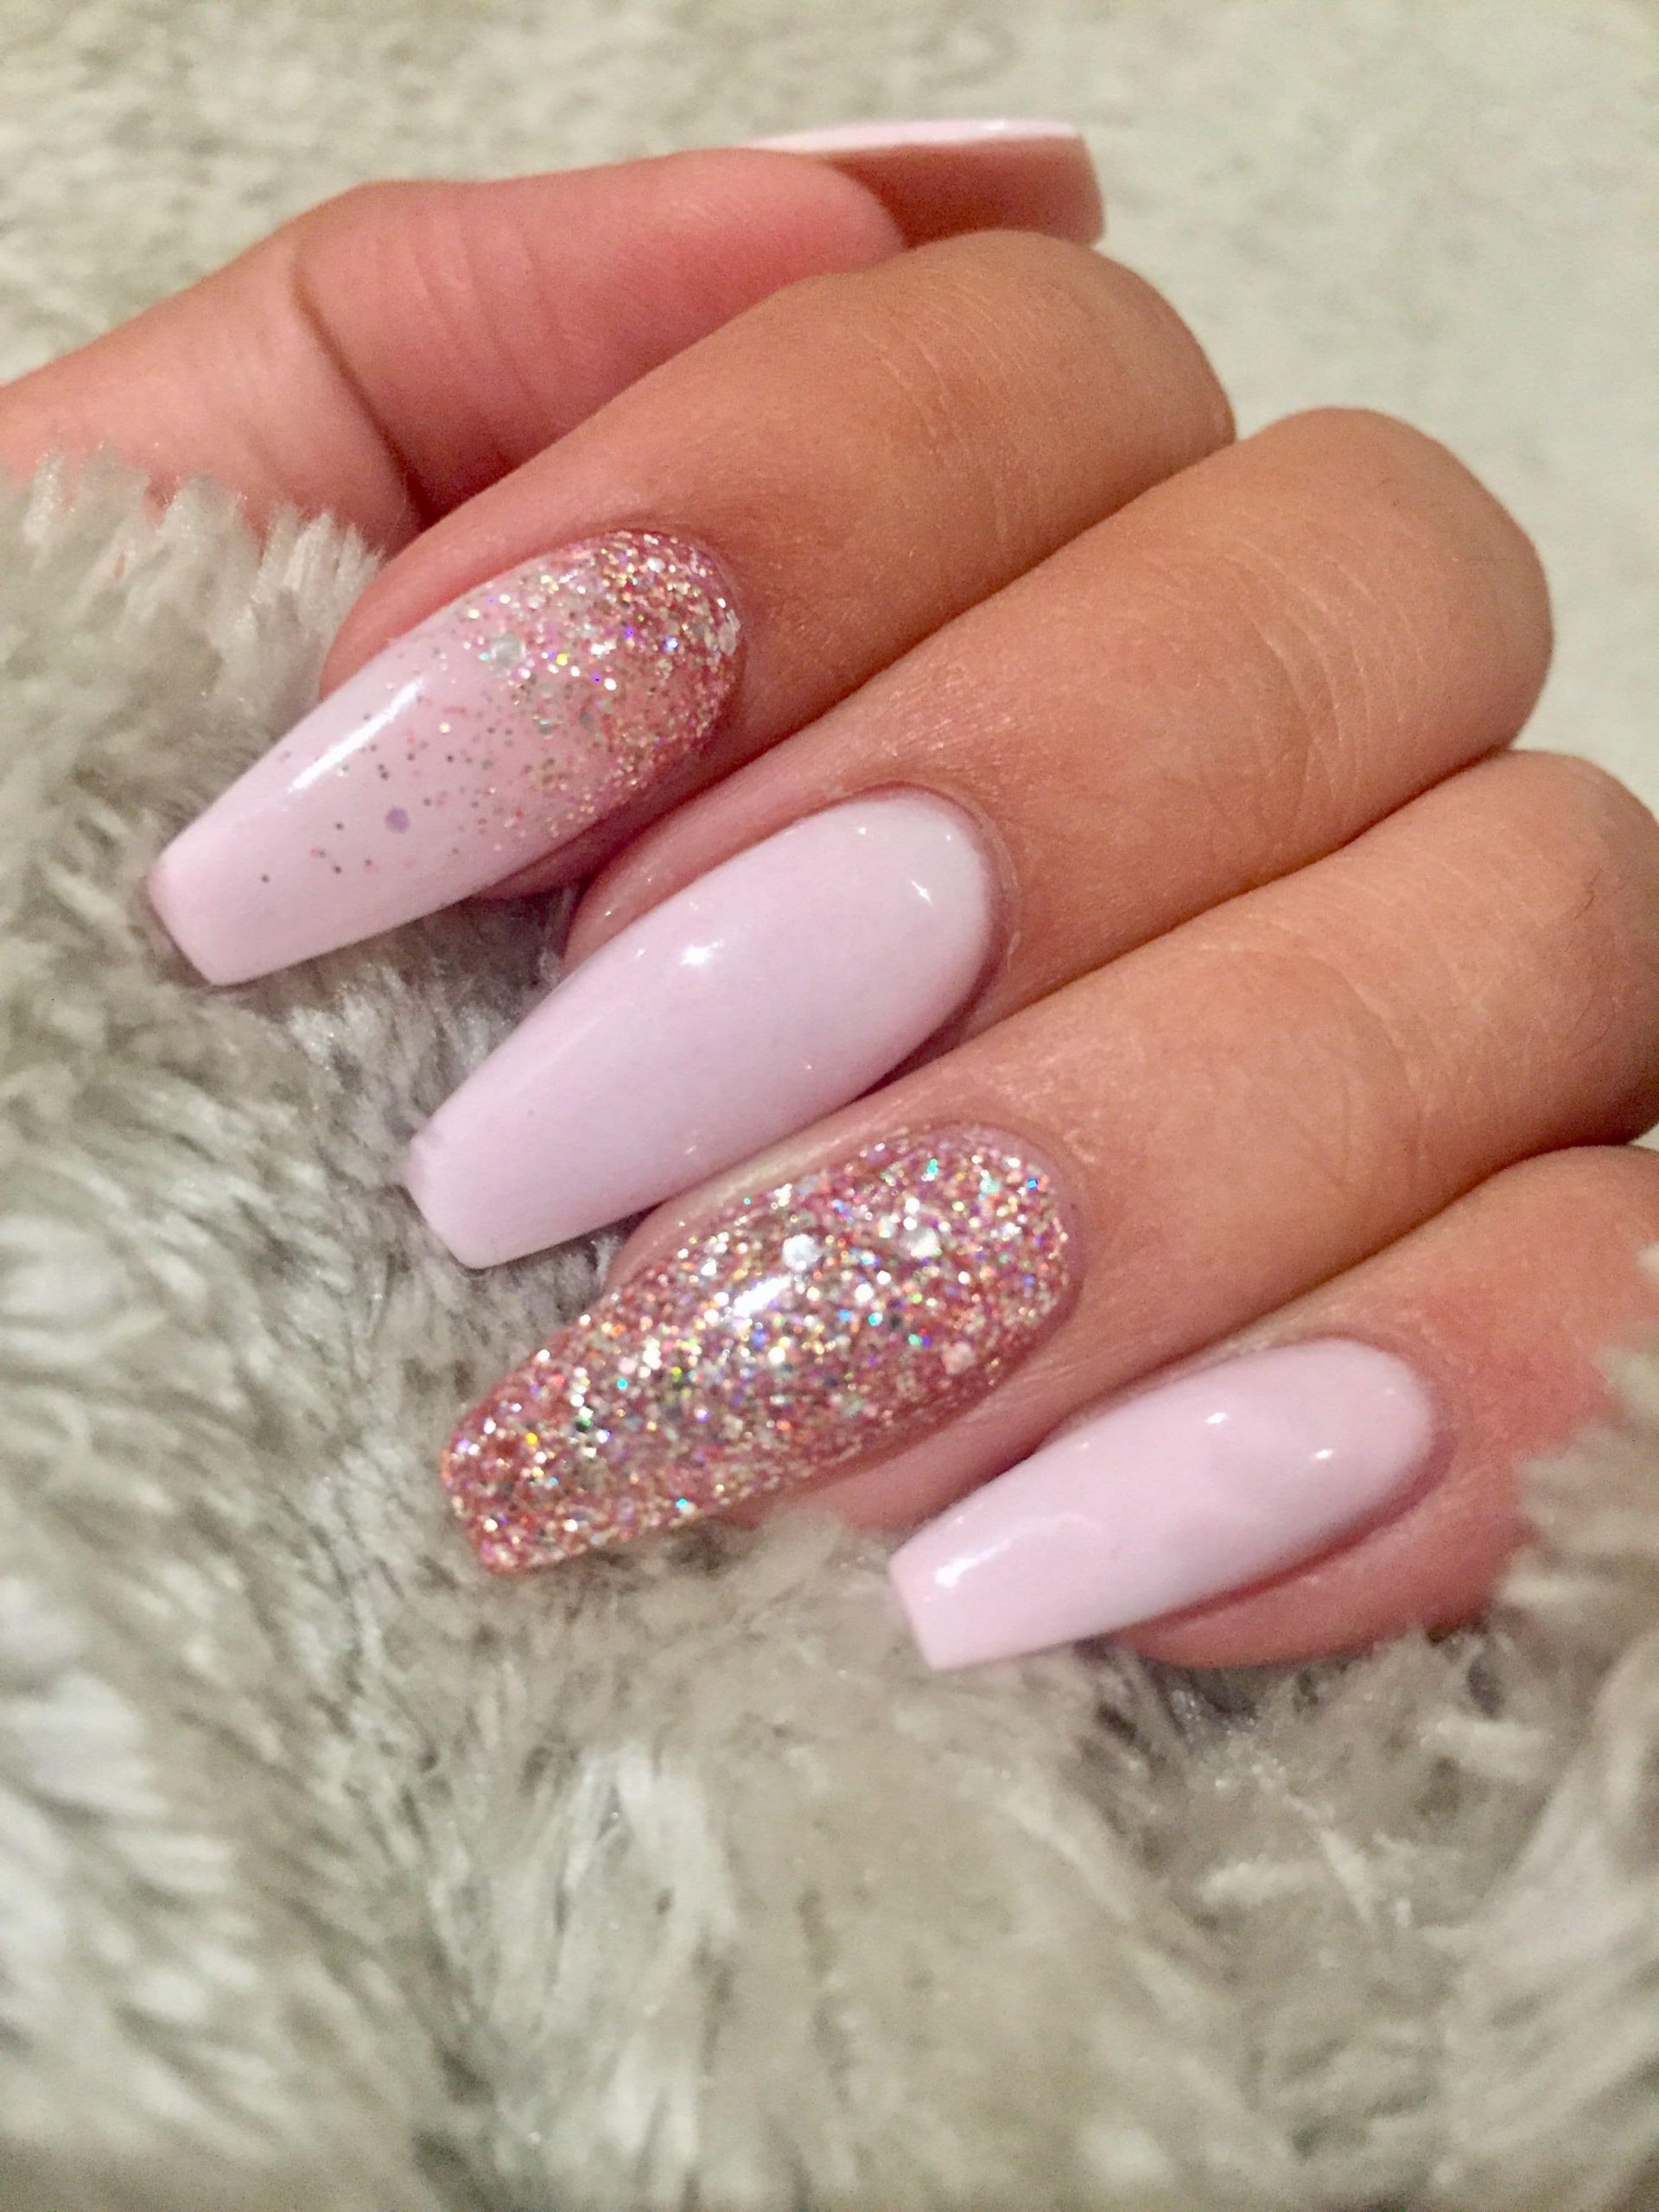 Pink Coffin Nails With Glitter
 7 Fresh Acrylic Nail Designs Matte Light Oink and Gold